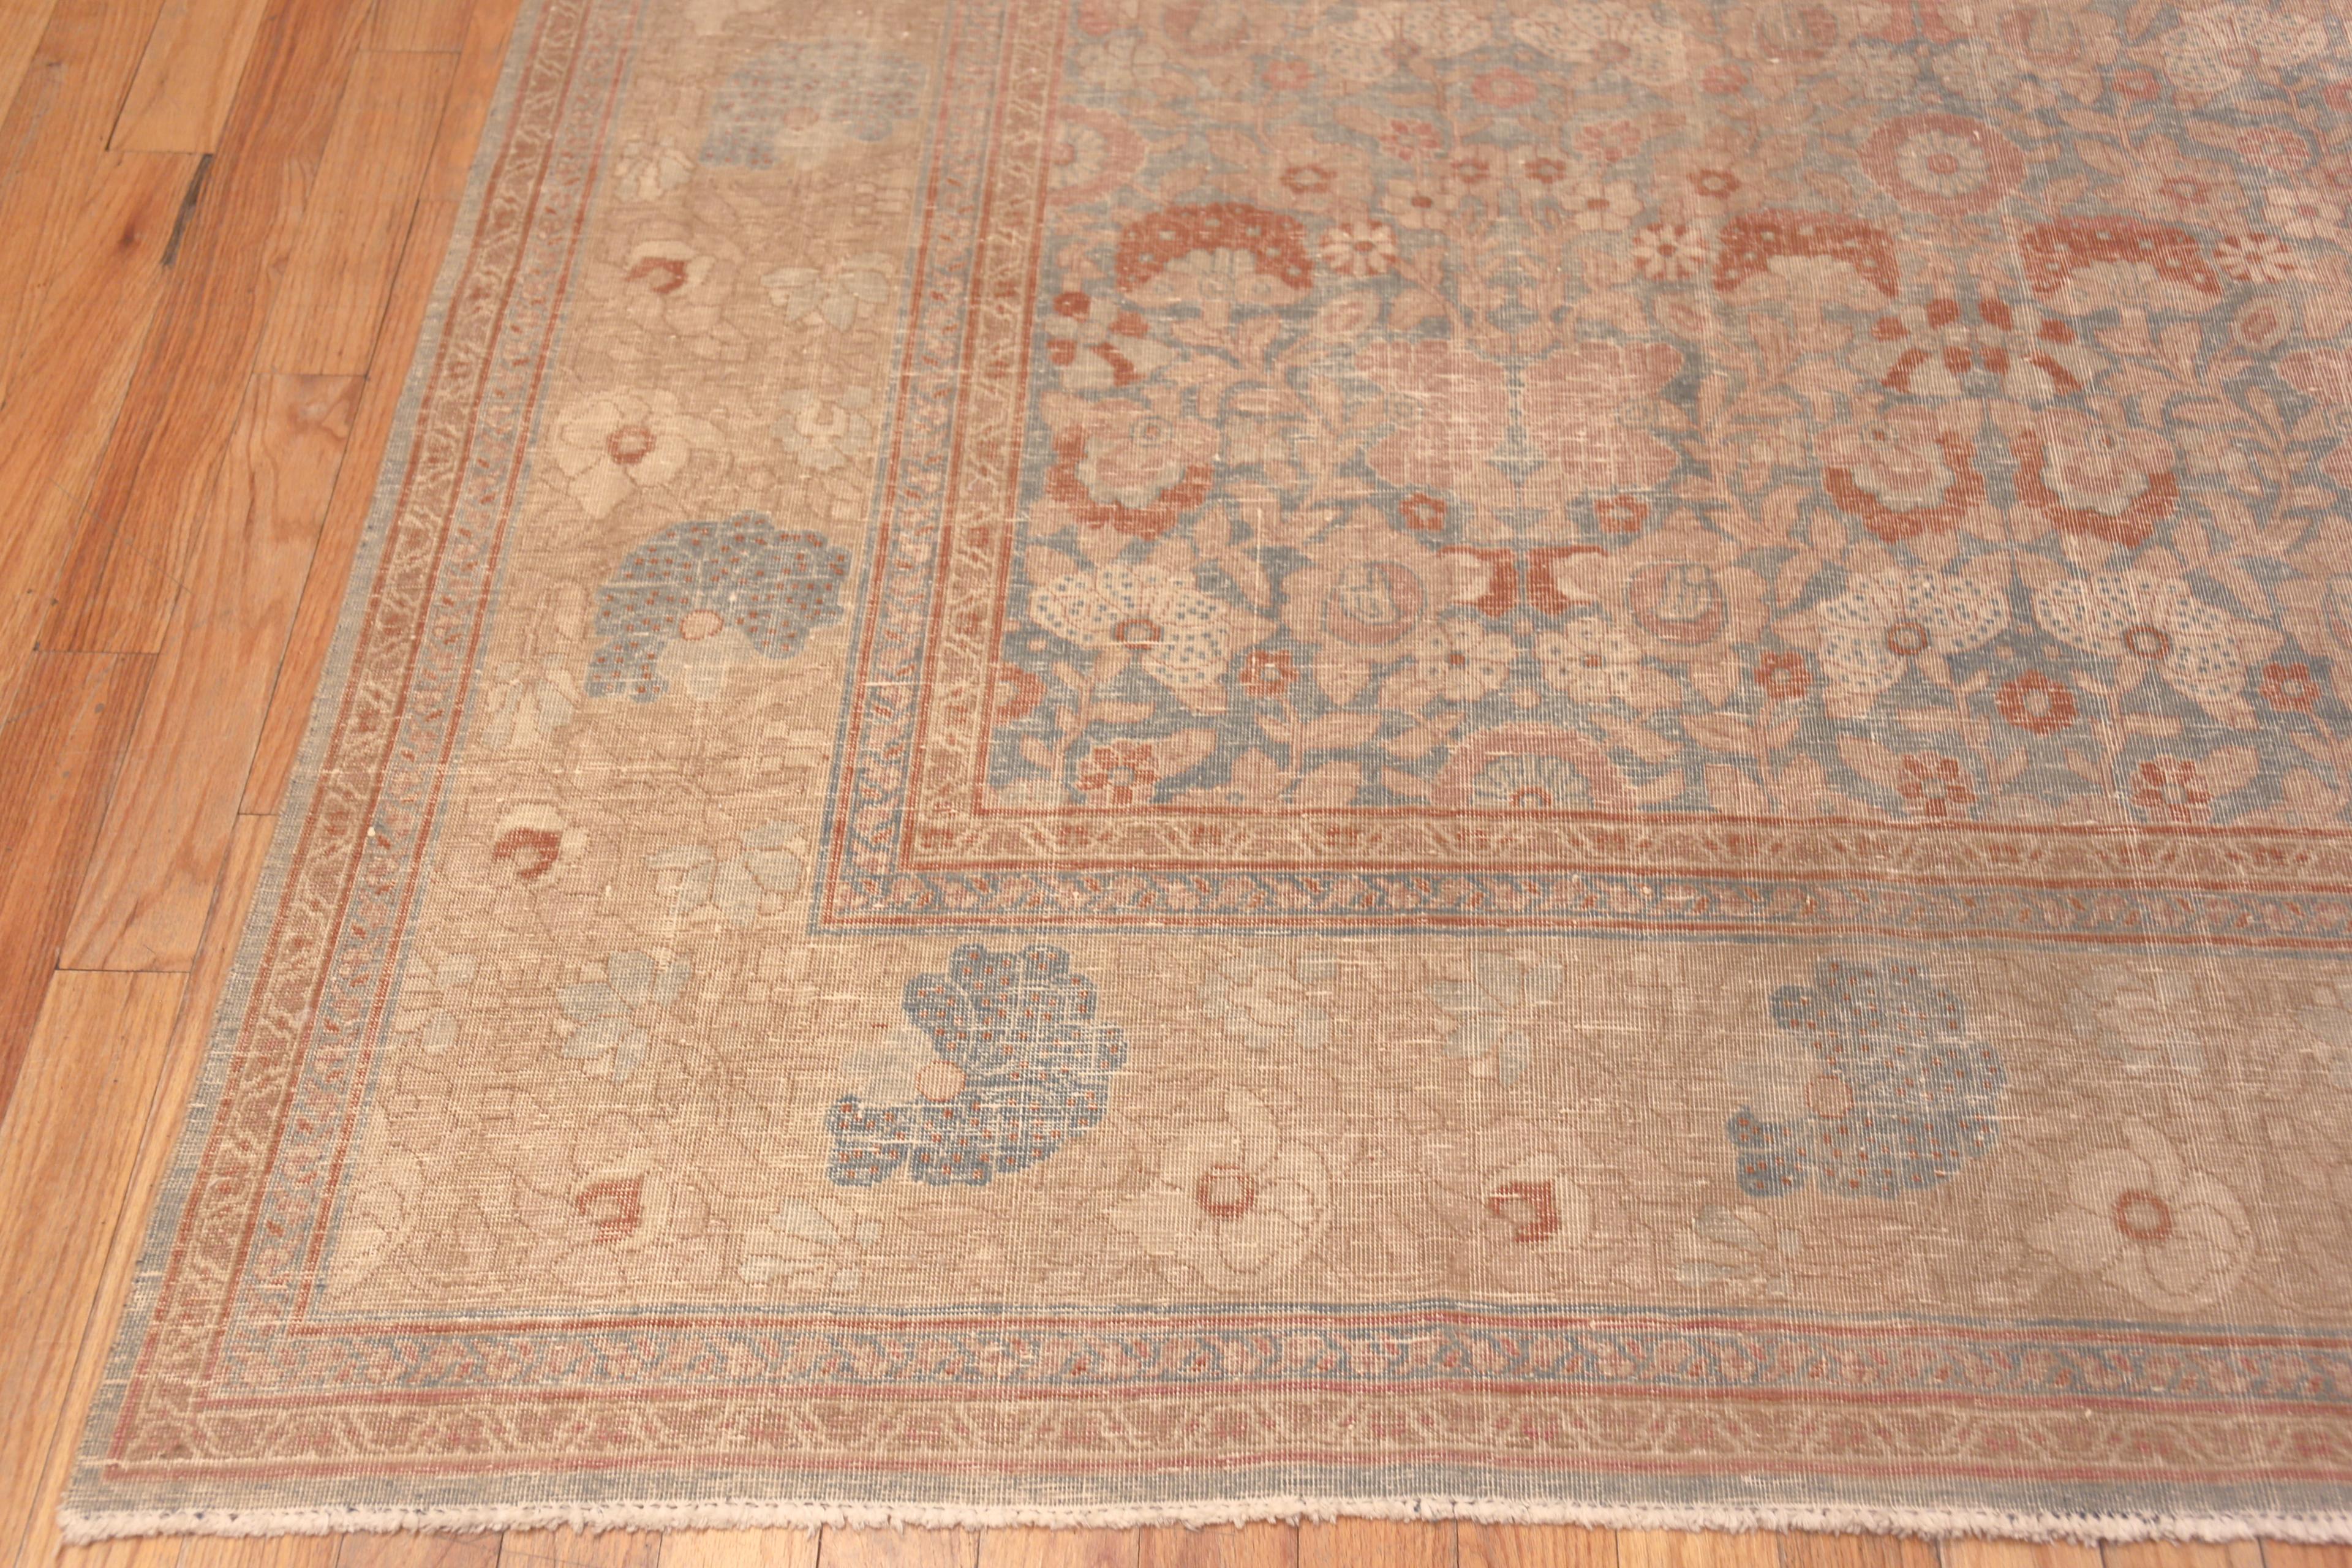 Hand-Knotted Phenomenal Decorative Antique Persian Tabriz Rug 9'2